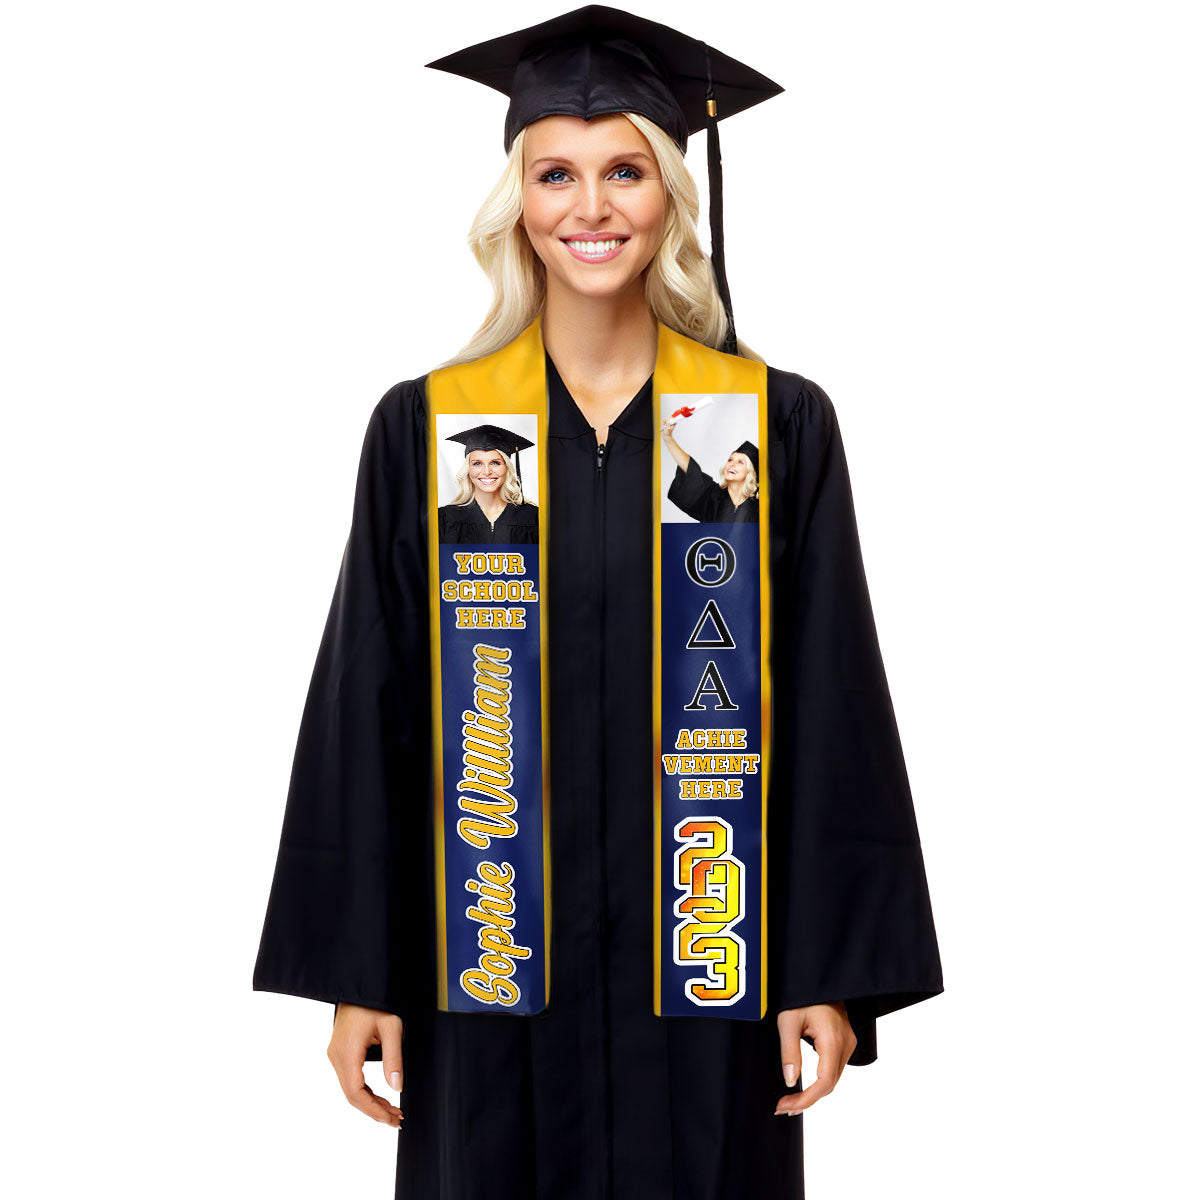 Honor Stoles vs Scholar Stoles: What's the Difference? | Senior Class  Graduation Products